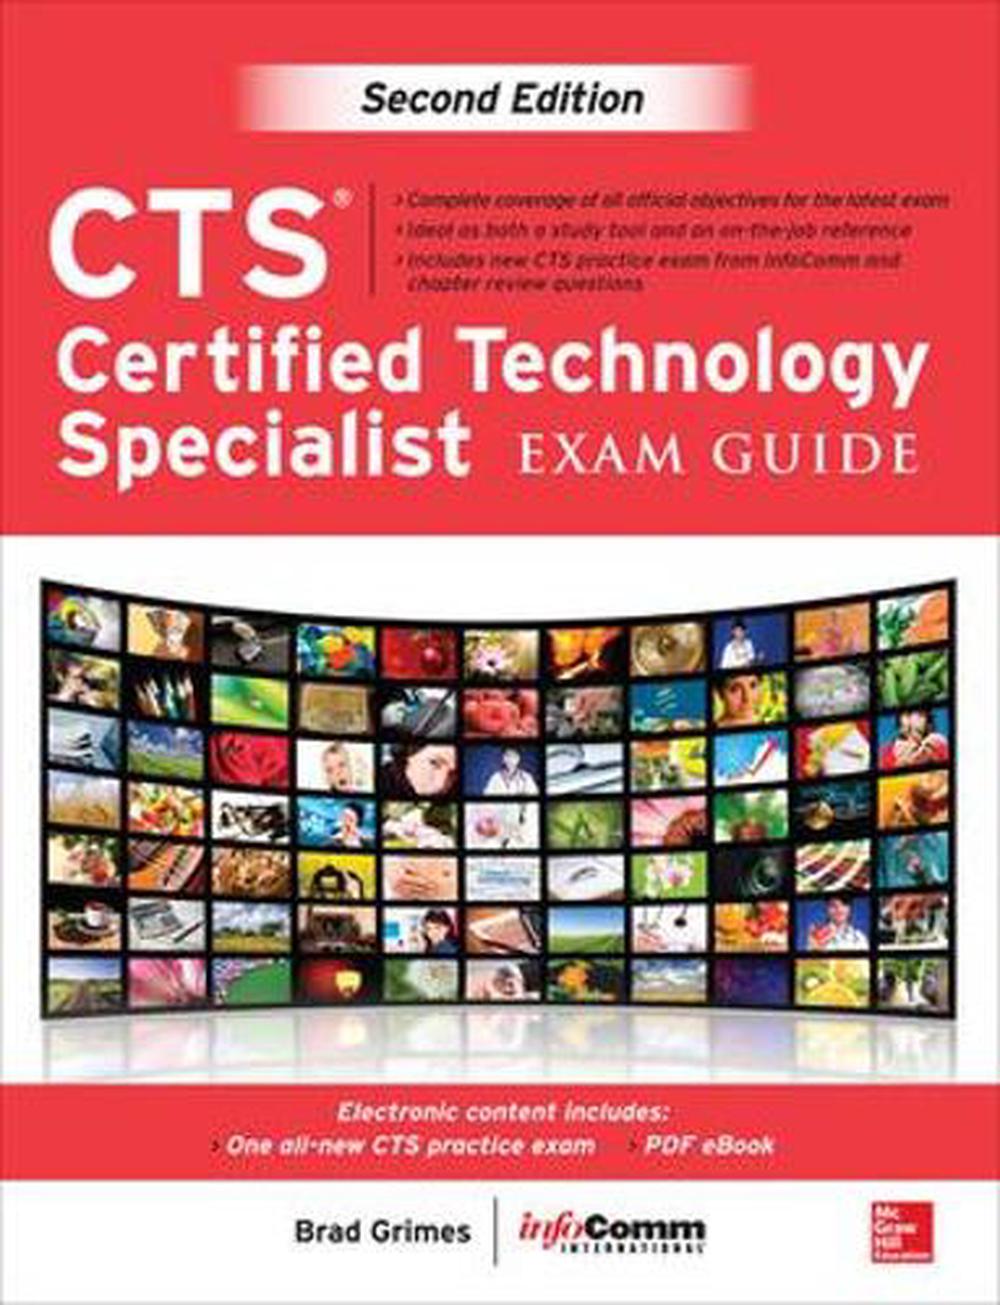 CTS Certified Technology Specialist Exam Guide, Second Edition by Brad